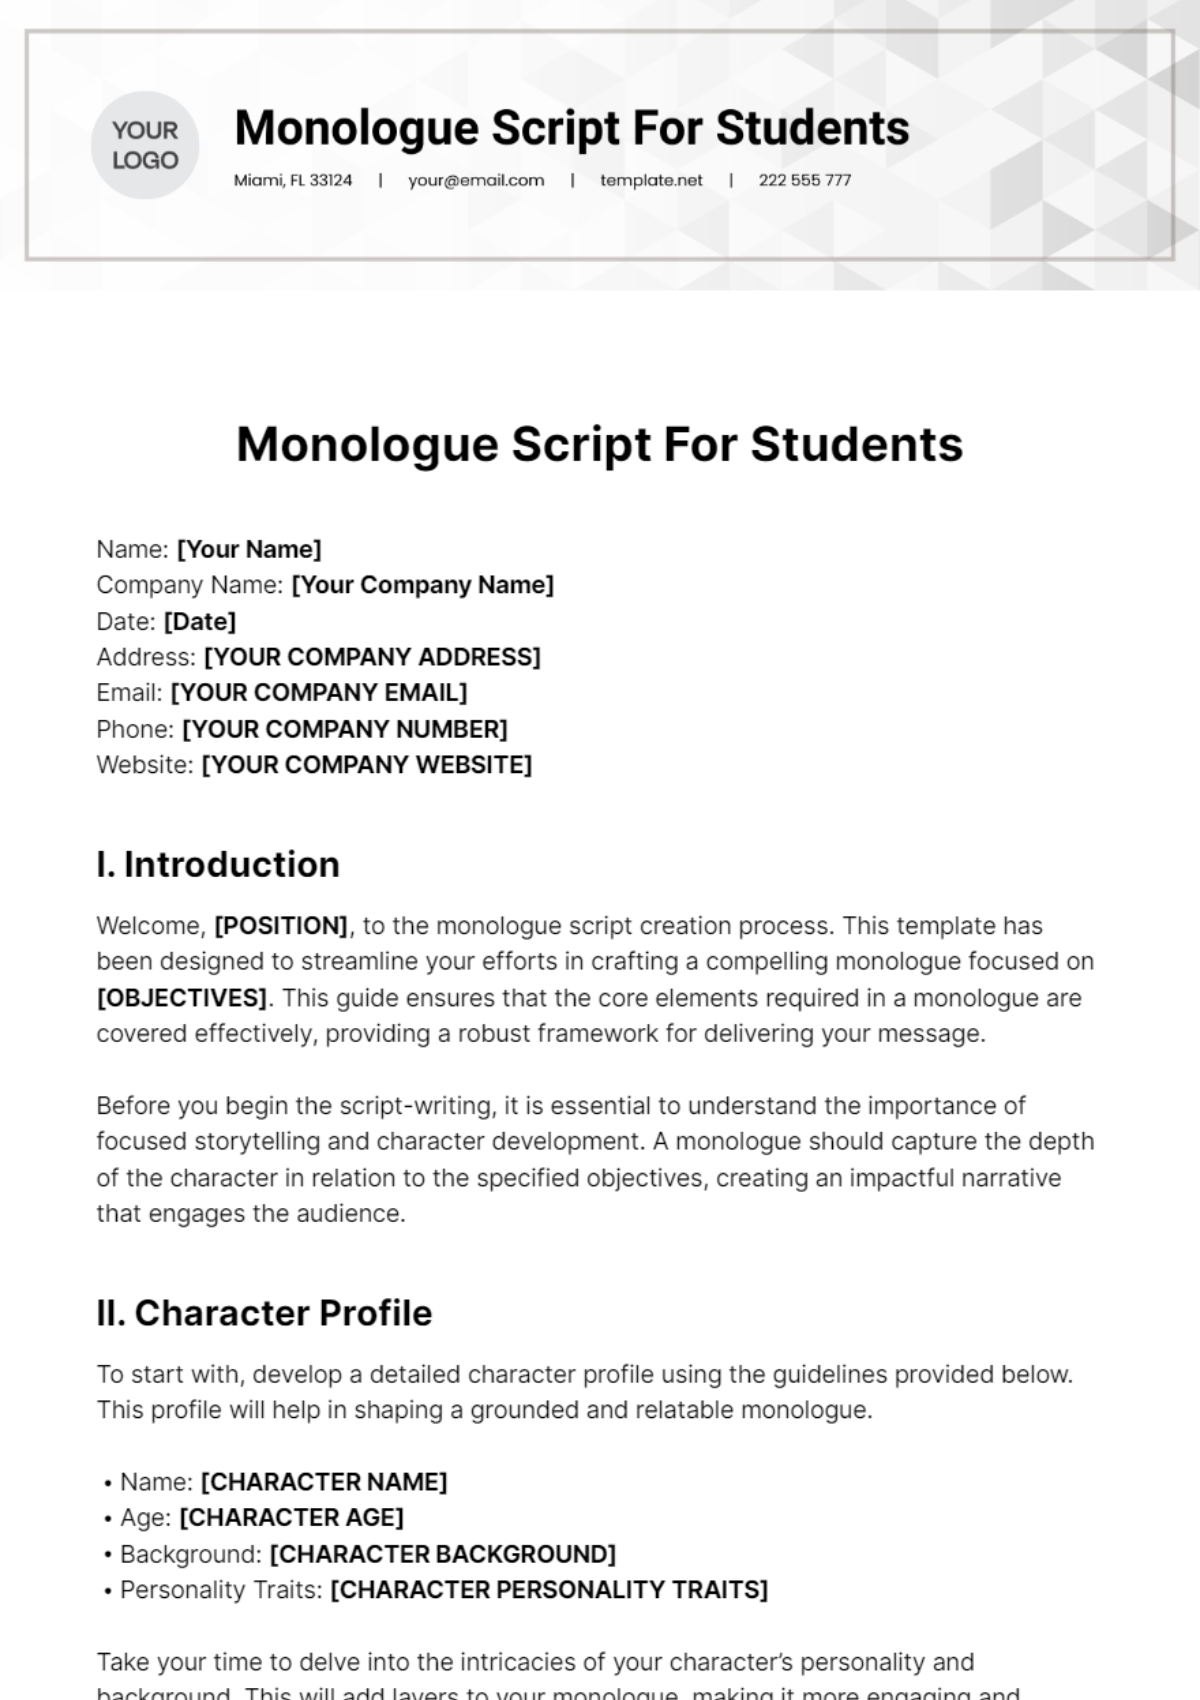 Monologue Script For Students Template